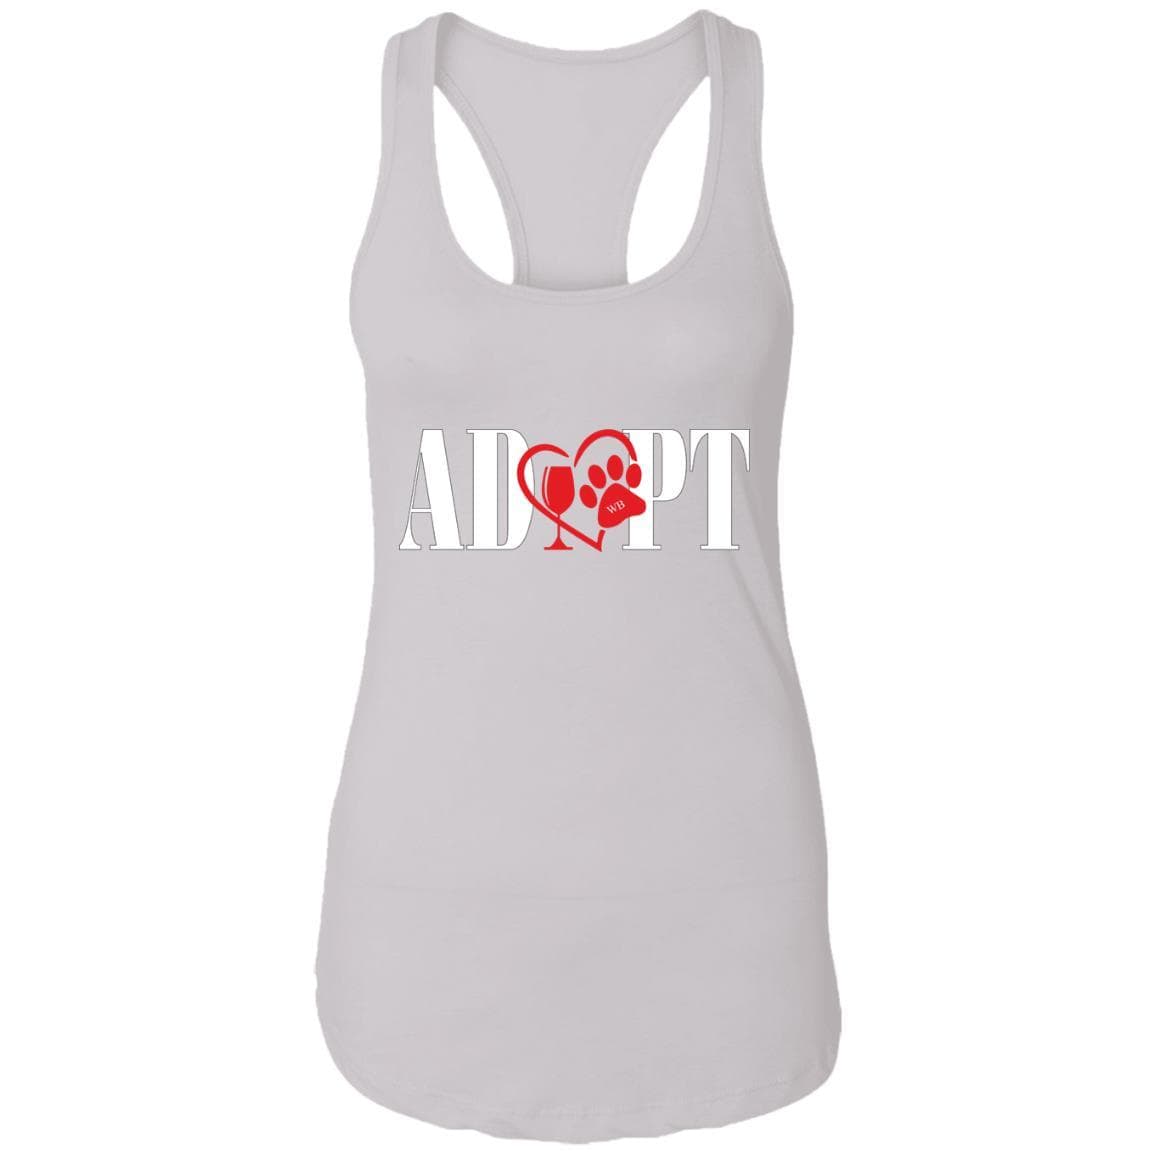 T-Shirts White / X-Small WineyBitches.Co “Adopt” Ladies Ideal Racerback Tank-Red Heart - Wht Lettering WineyBitchesCo